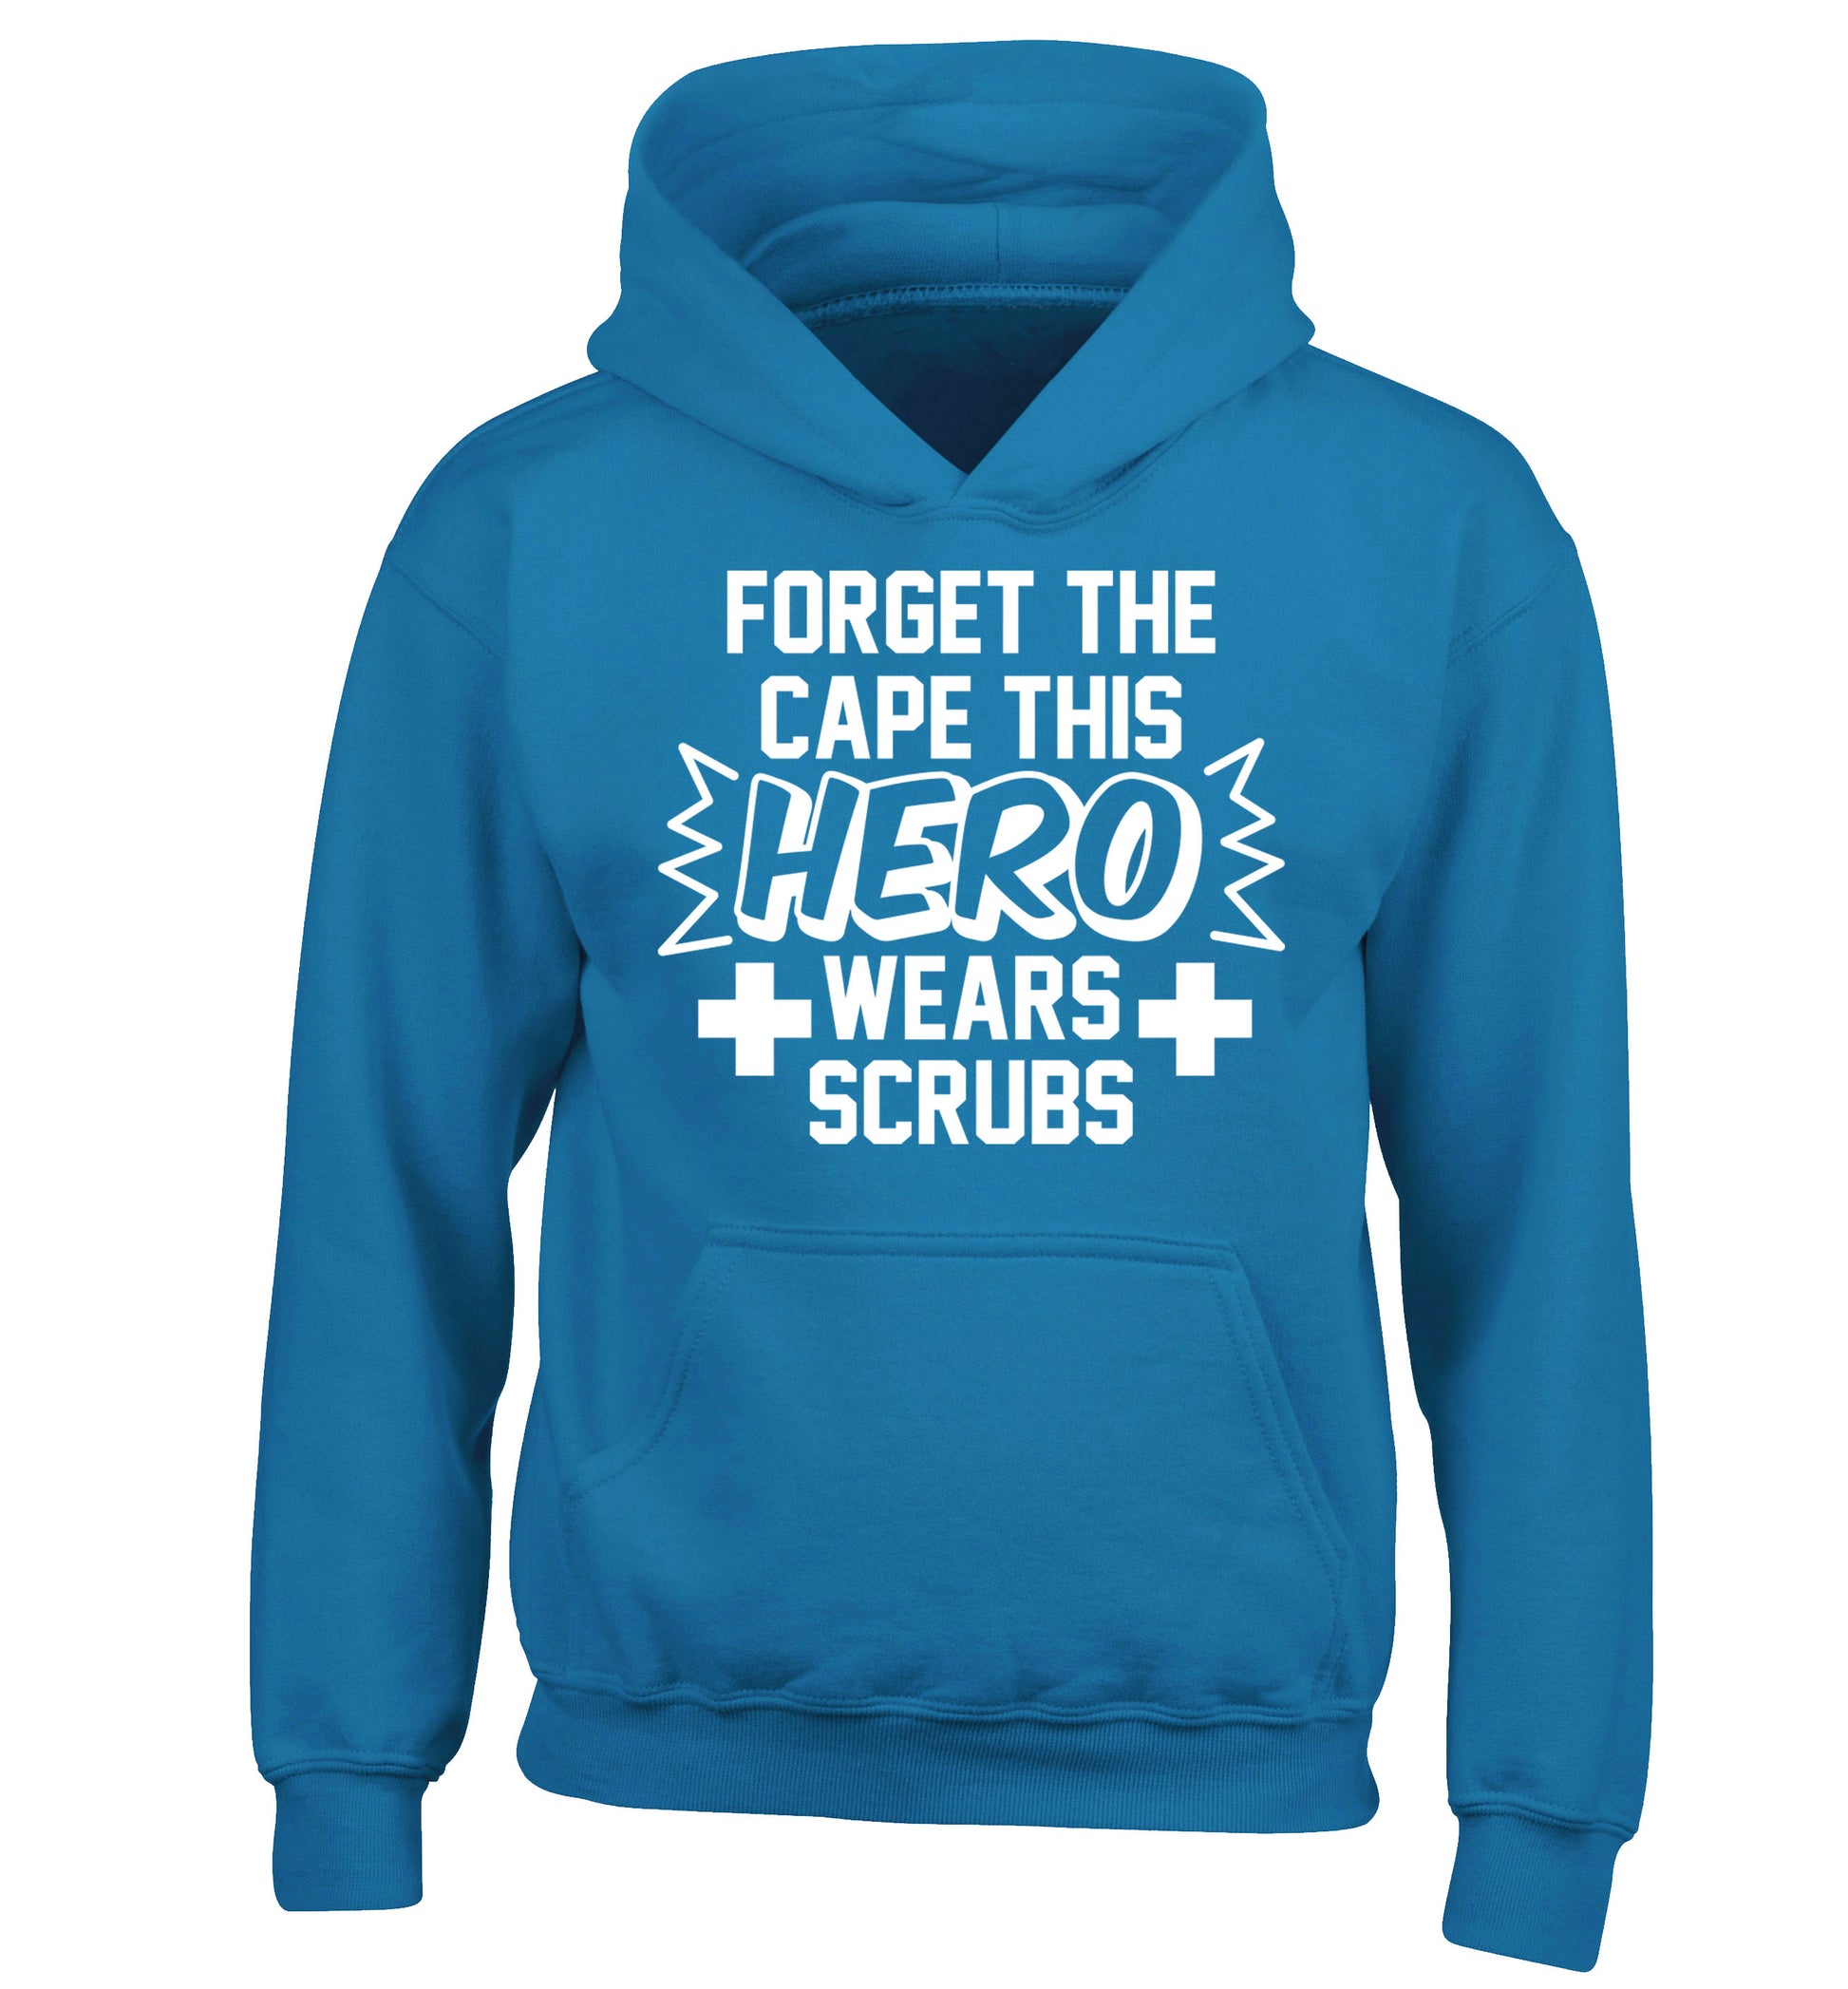 Forget the cape this hero wears scrubs children's blue hoodie 12-14 Years